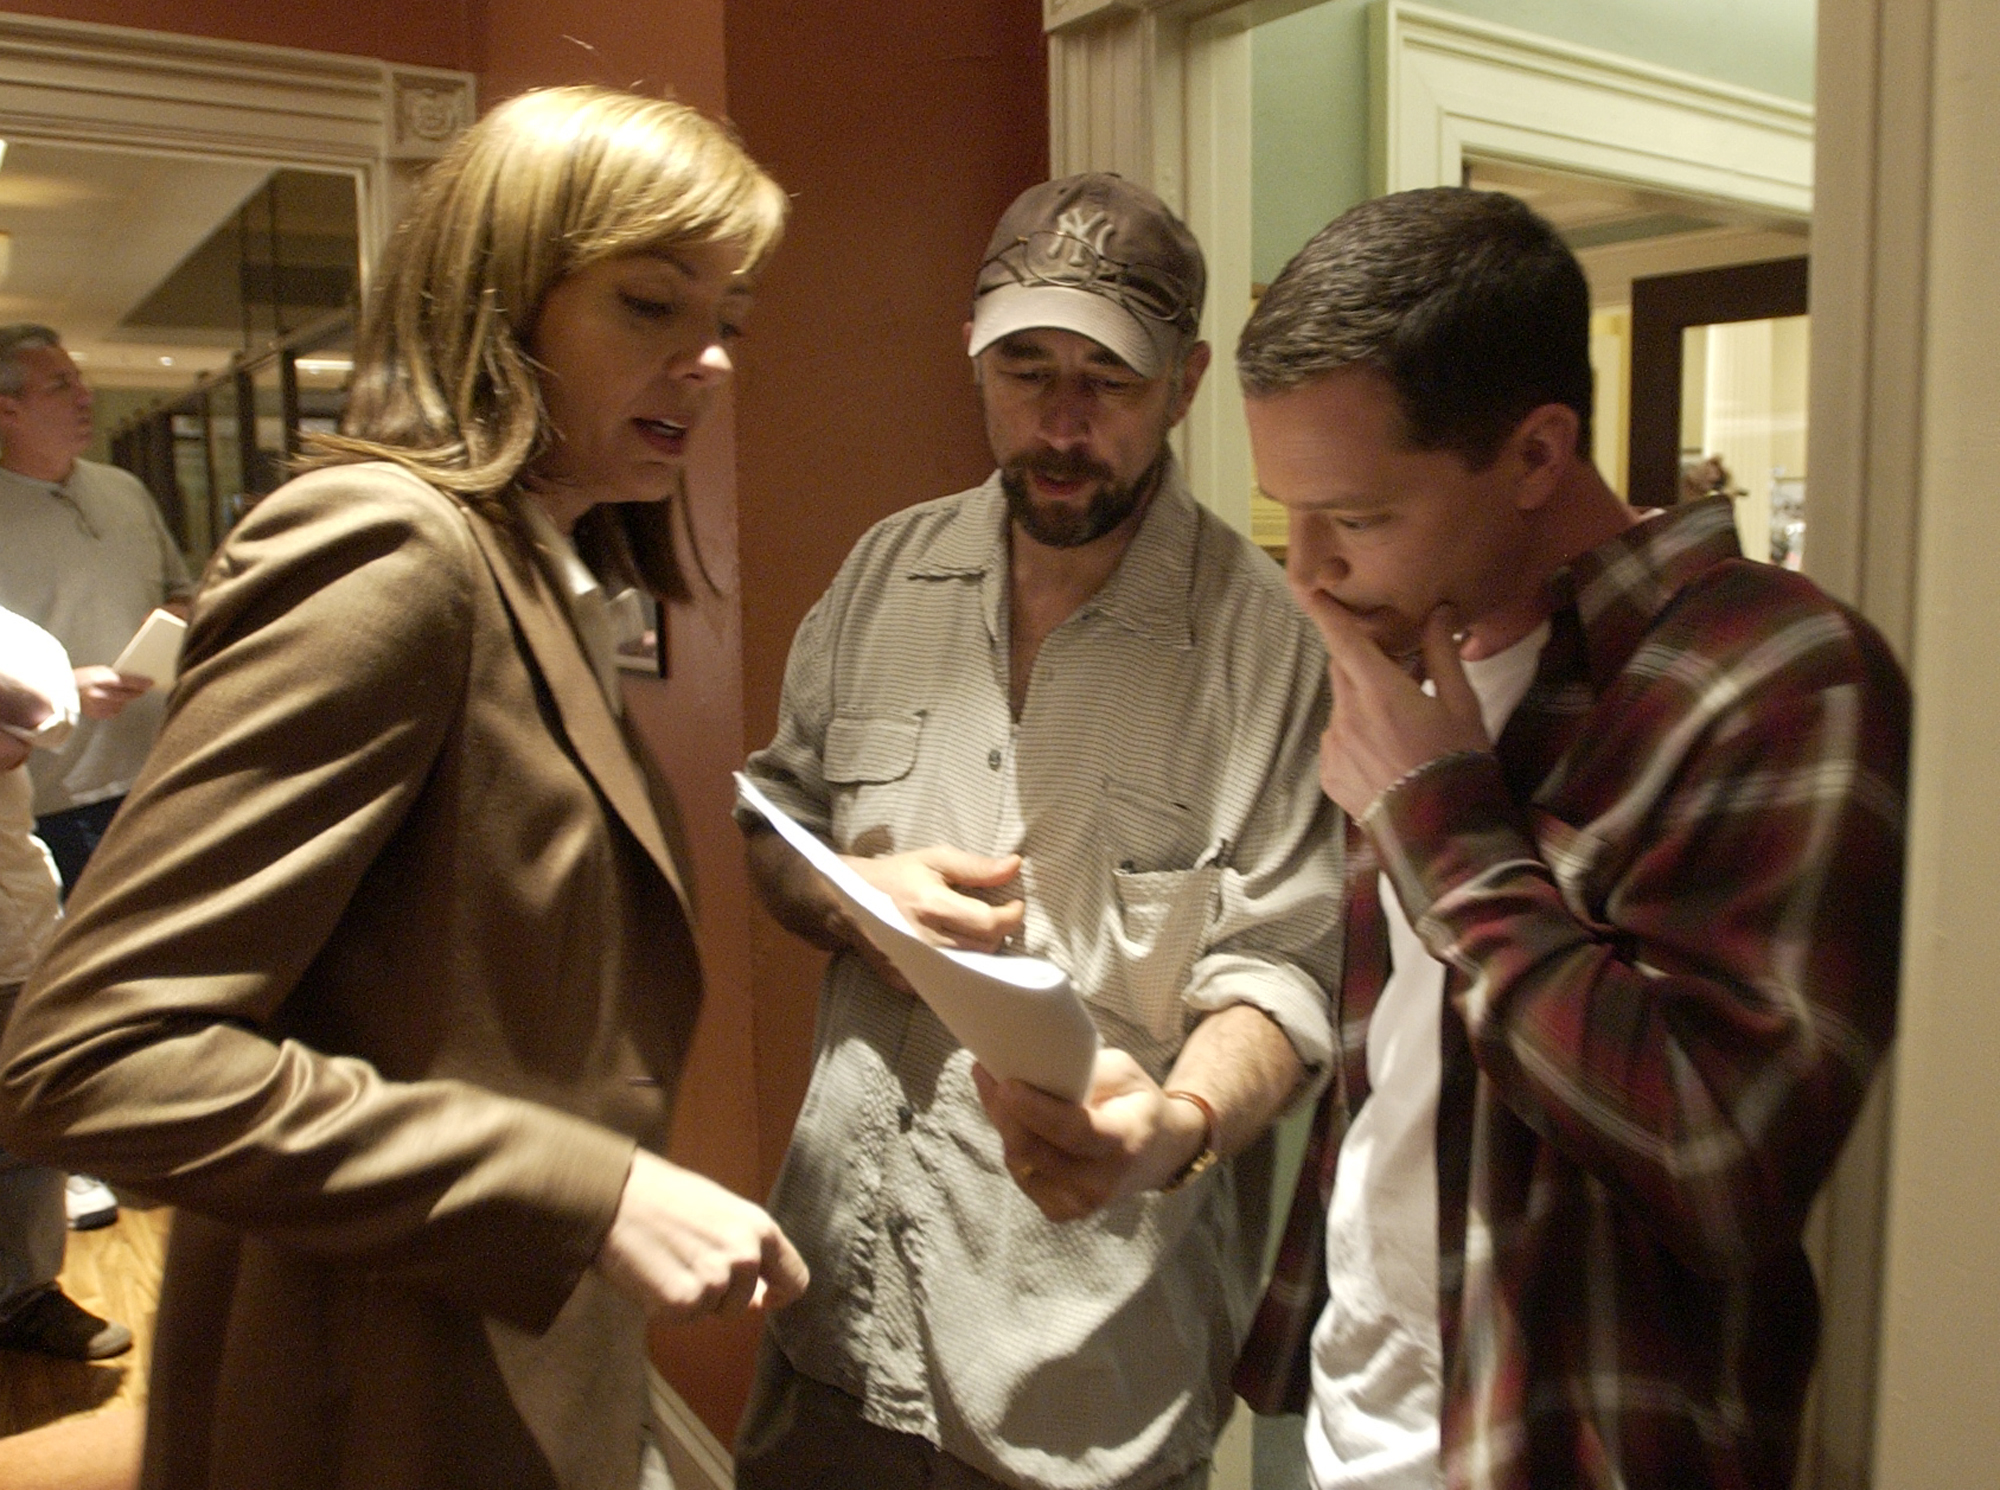 Actors Josh Malina, right, who plays White House aide Will Bailey on NBC's  "The West Wing," goes over a scene with cast members Allison Janney, and Richard Schiff during filming in Burbank, Calif., March 10, 2004. (Reed Saxon—AP)